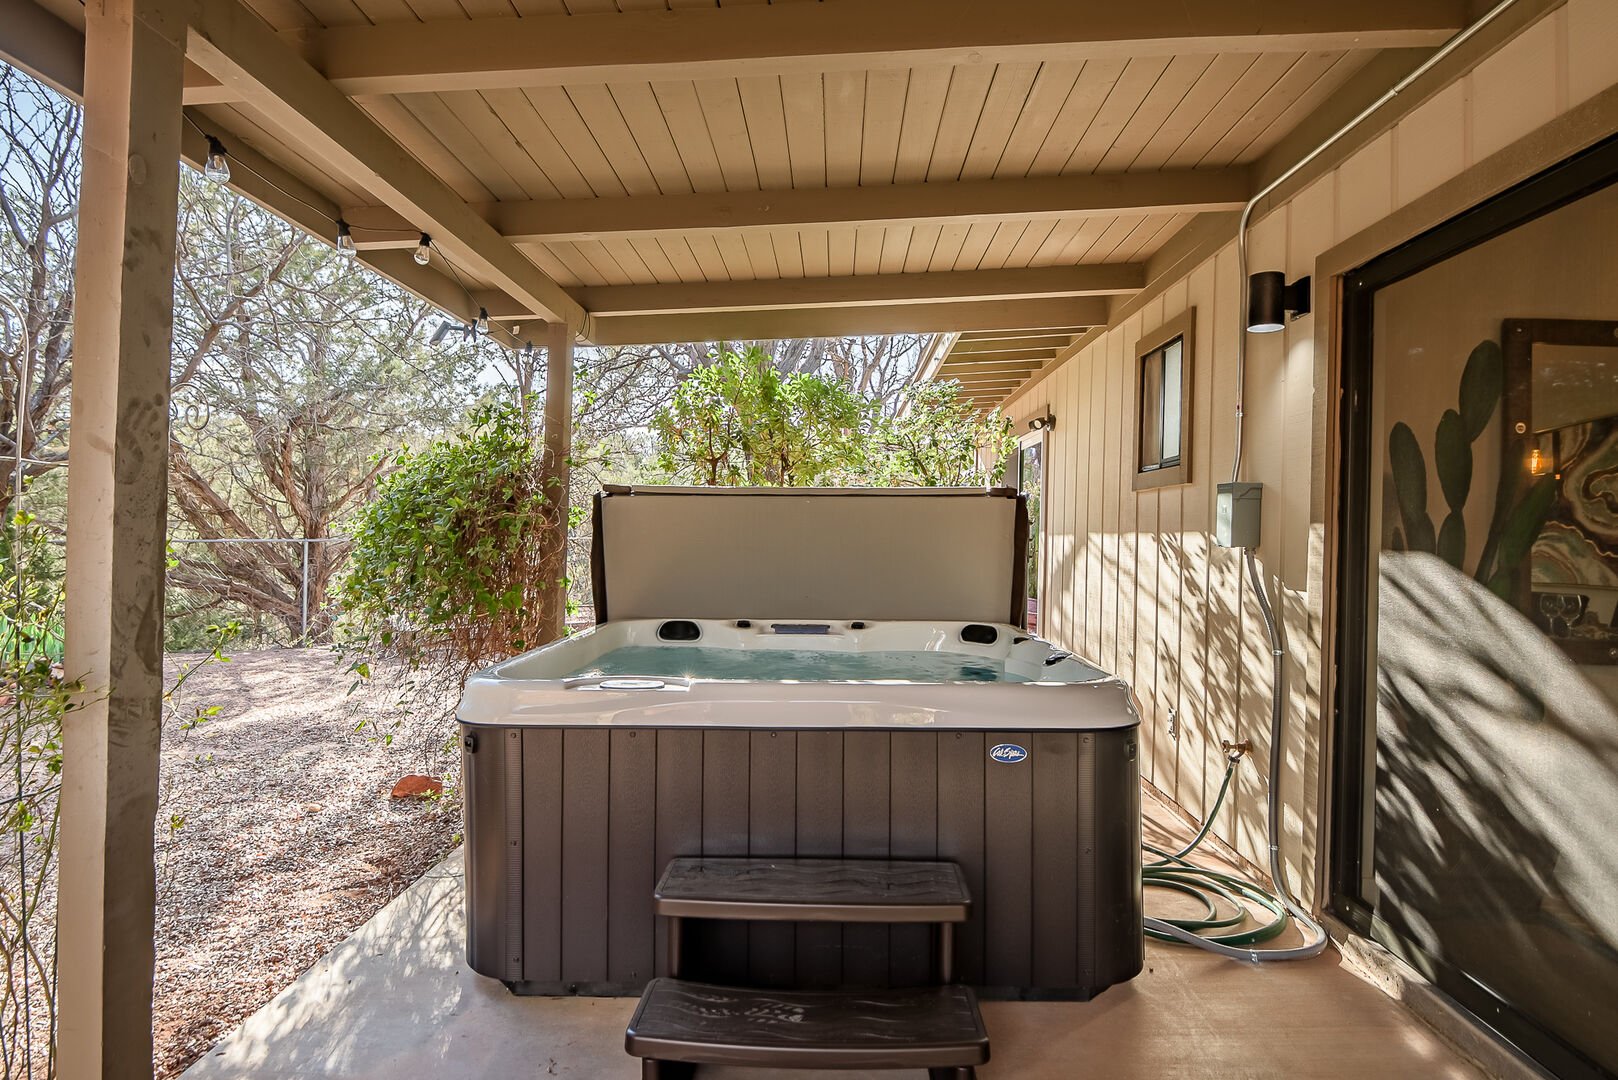 Relax in the Private Hot Tub!